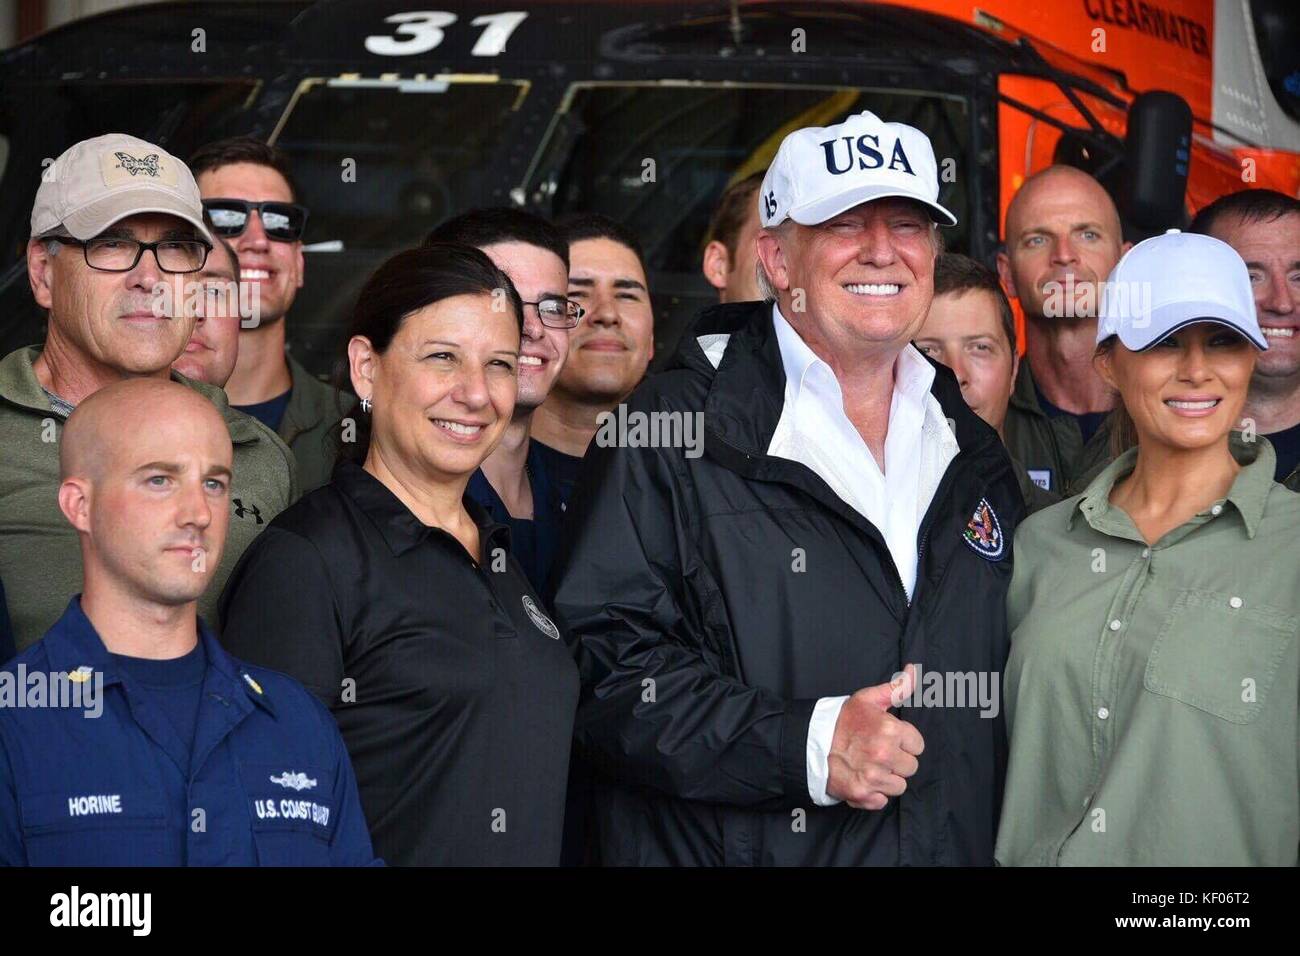 U.S. Energy Secretary Rick Perry (left), Homeland Security Acting Secretary Elaine Duke, U.S. President Donald Trump, and First Lady Melania Trump meet with U.S. Coast Guard officers in the aftermath of Hurricane Irma September 14, 2017 in Ft. Myers, Florida. Stock Photo